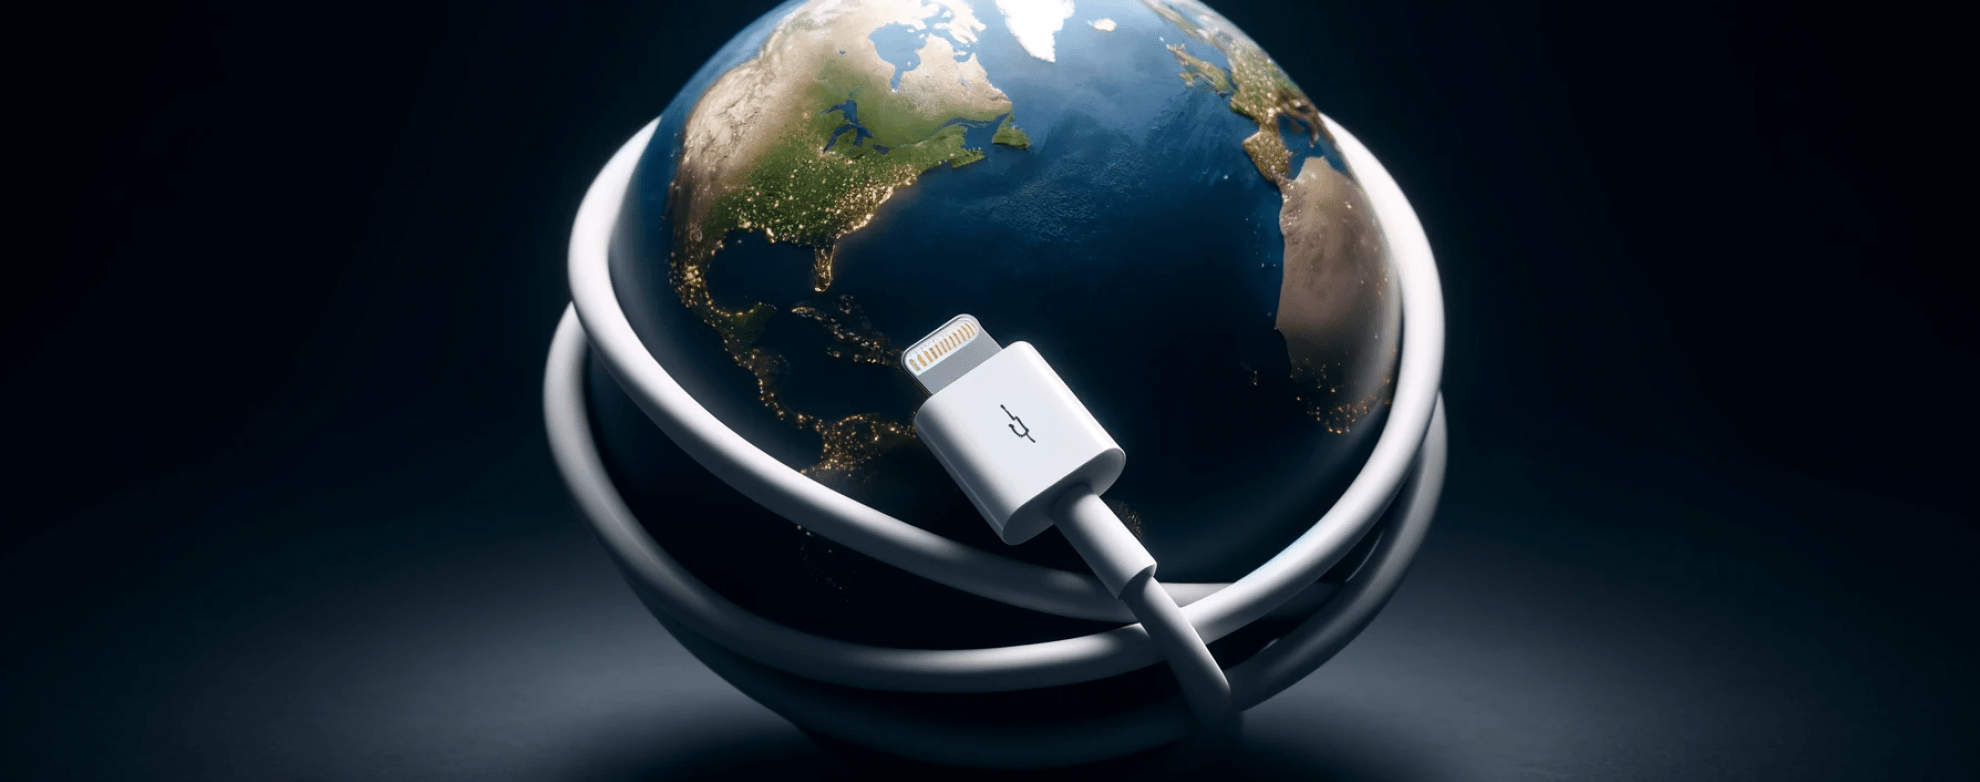 Globe with IPhone charging cable wrapped around it